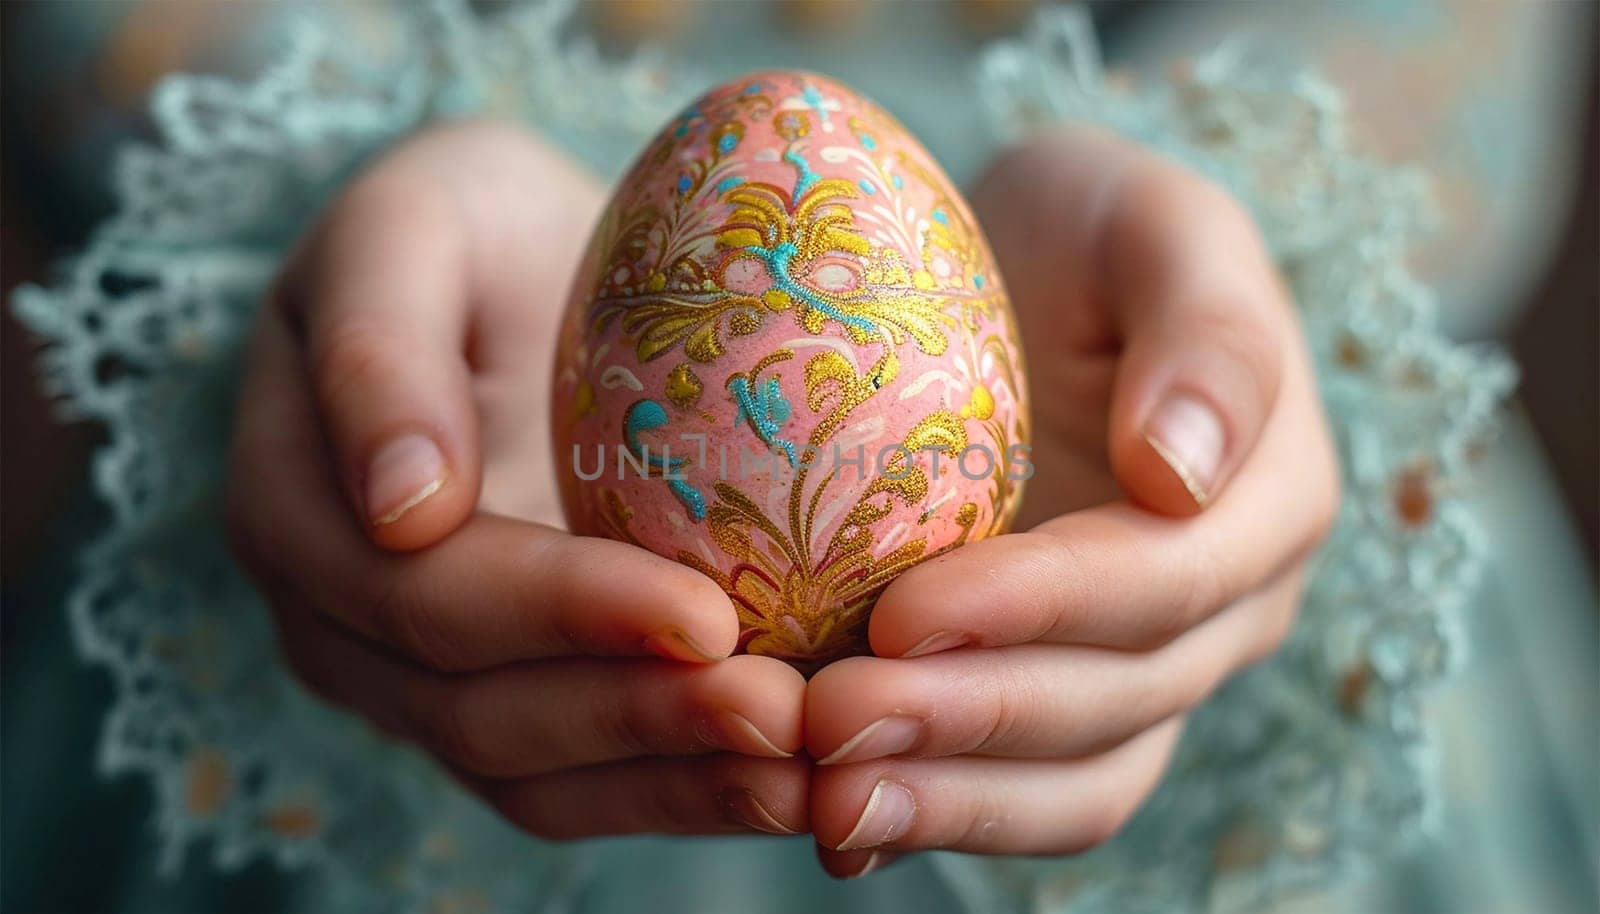 The hands of a little girl holding painted Easter egg front view, Happy Easter Holiday design decorated egg with beautiful colorful details stylish